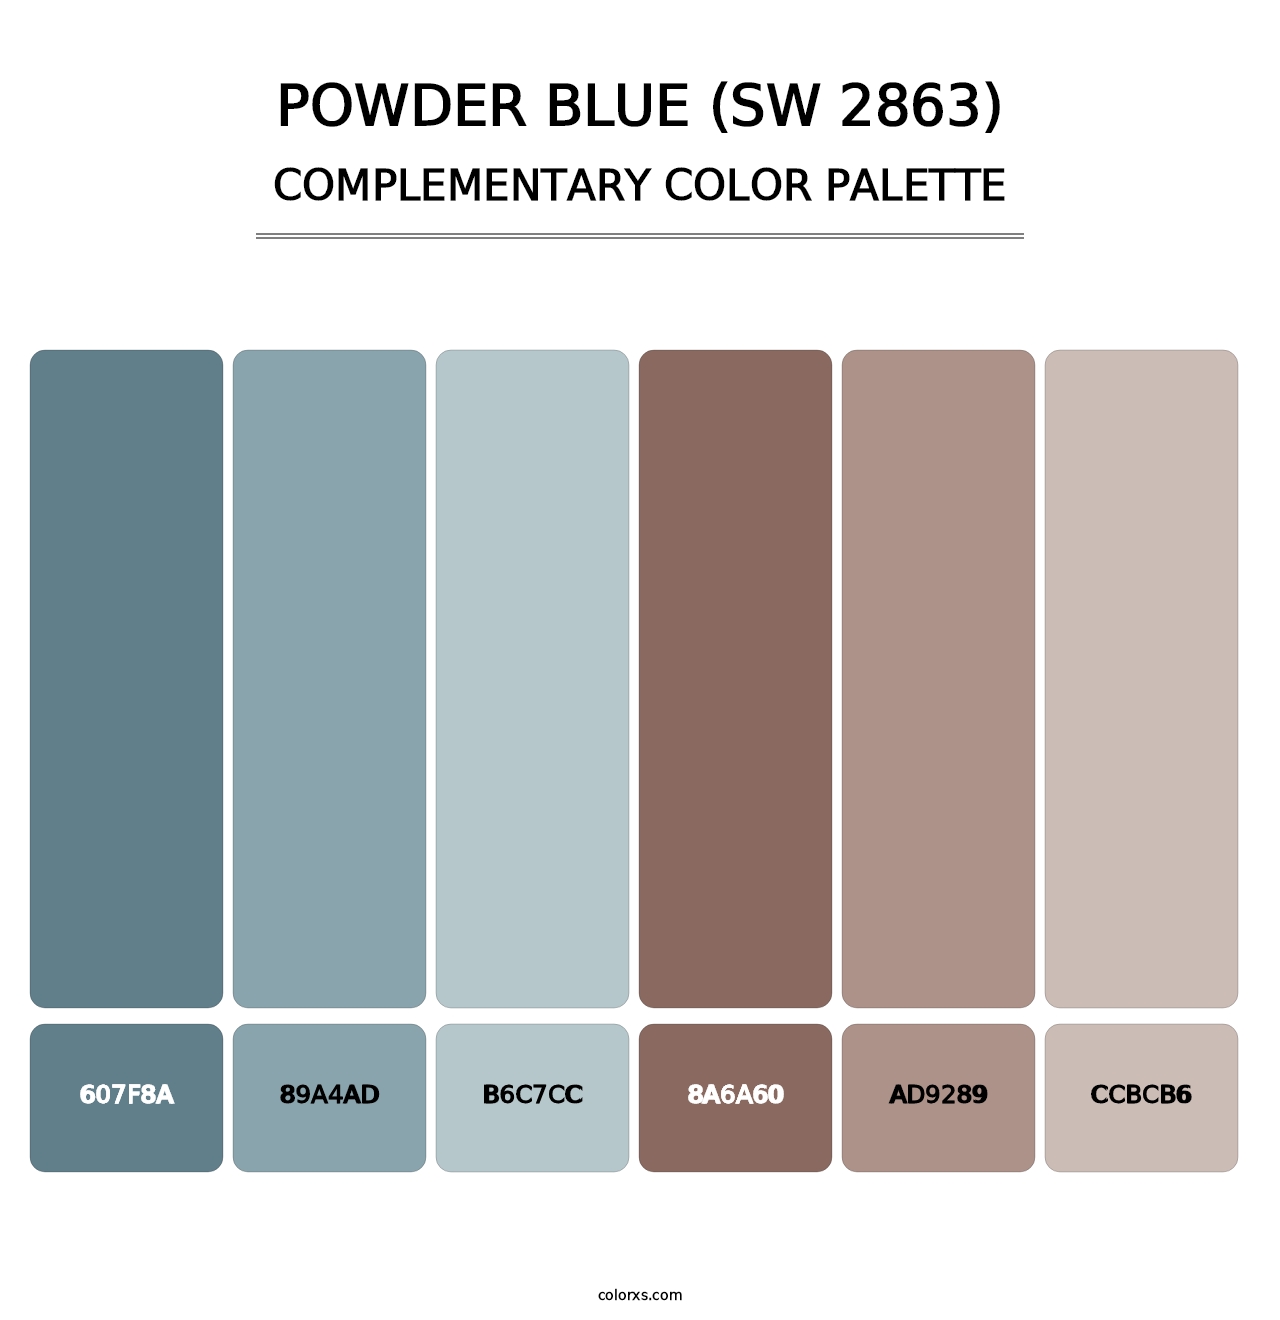 Powder Blue (SW 2863) - Complementary Color Palette